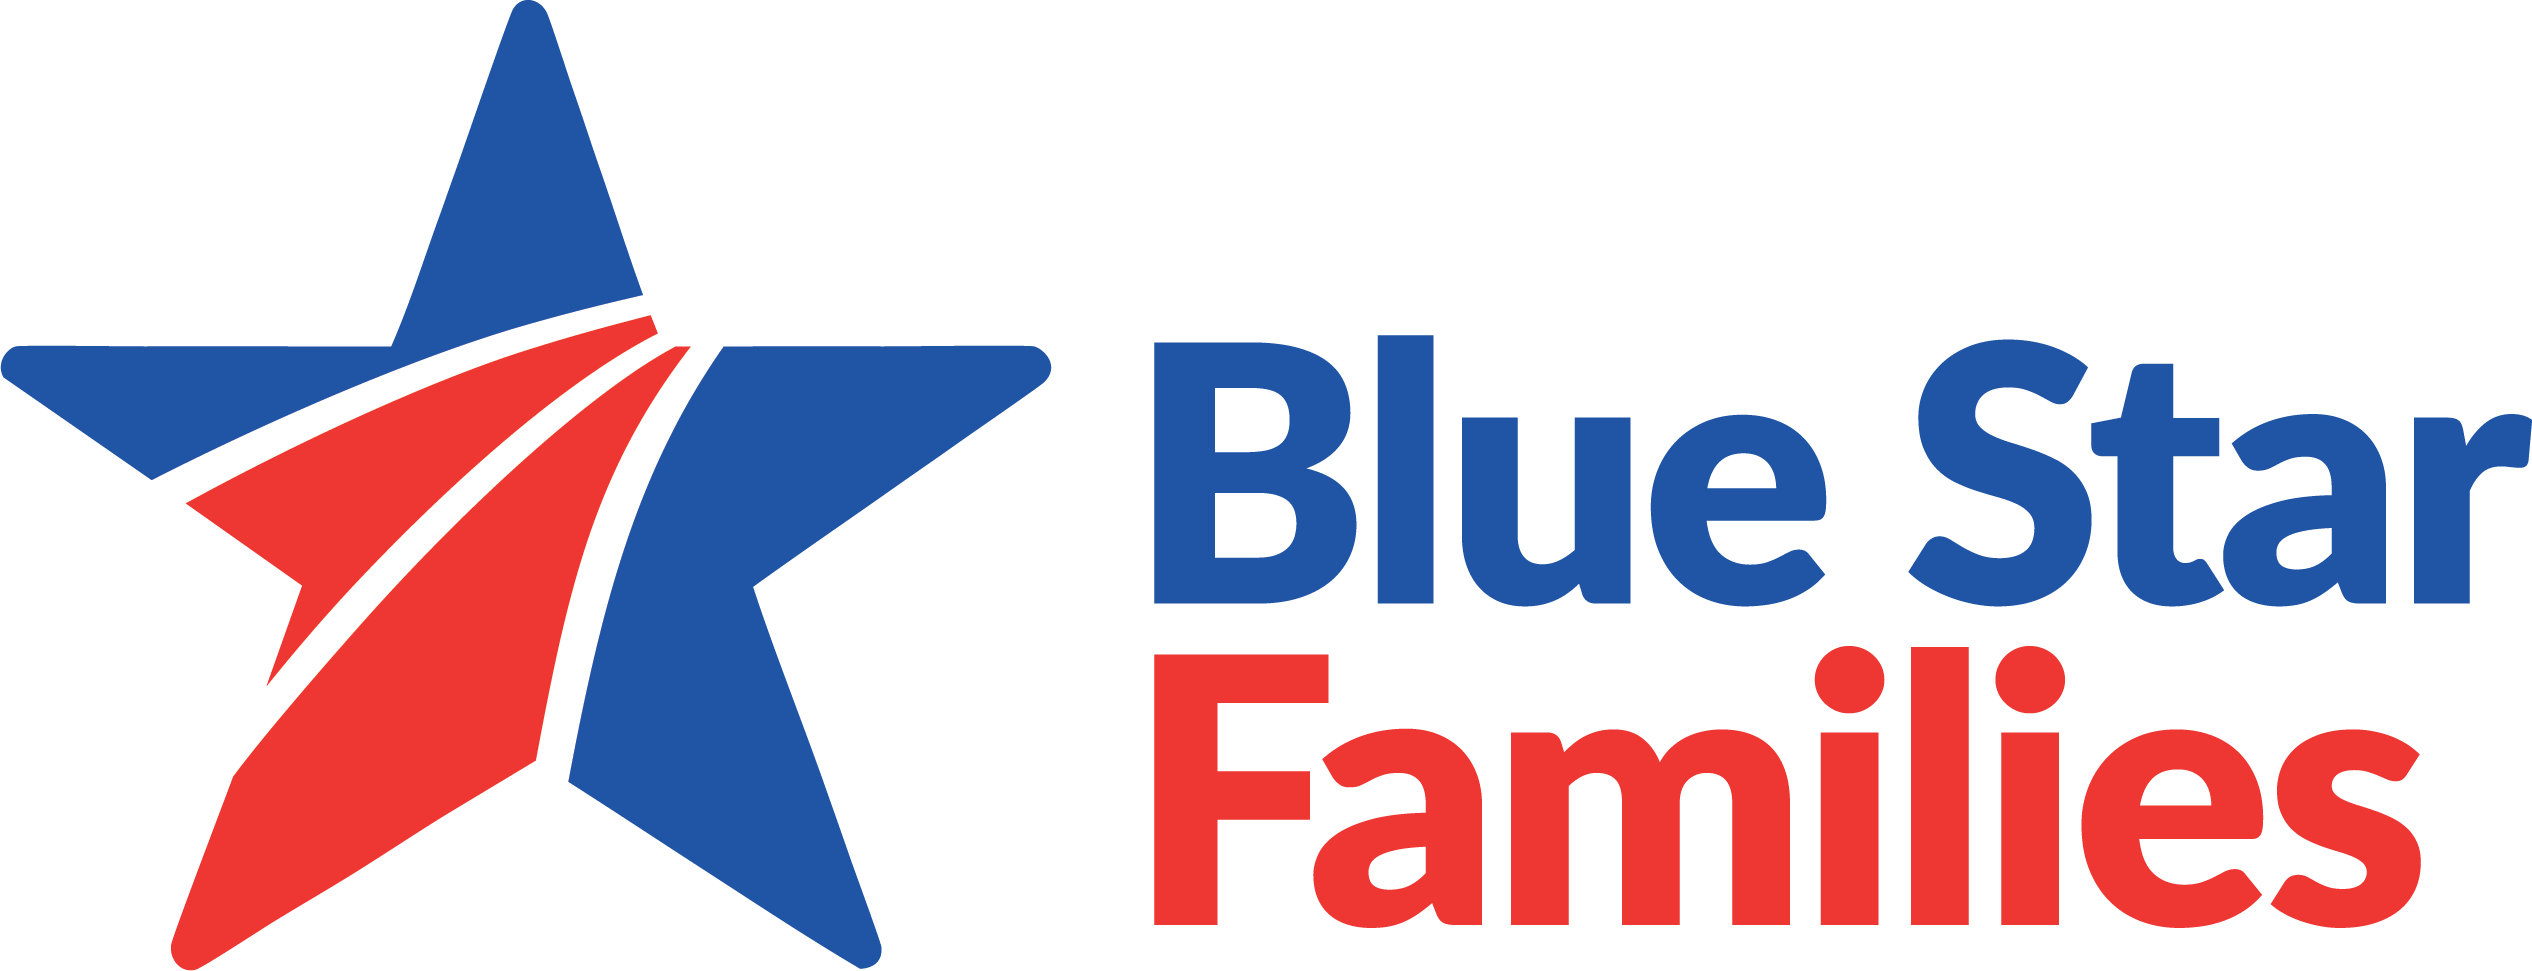 Blue Star Families red and blue logo